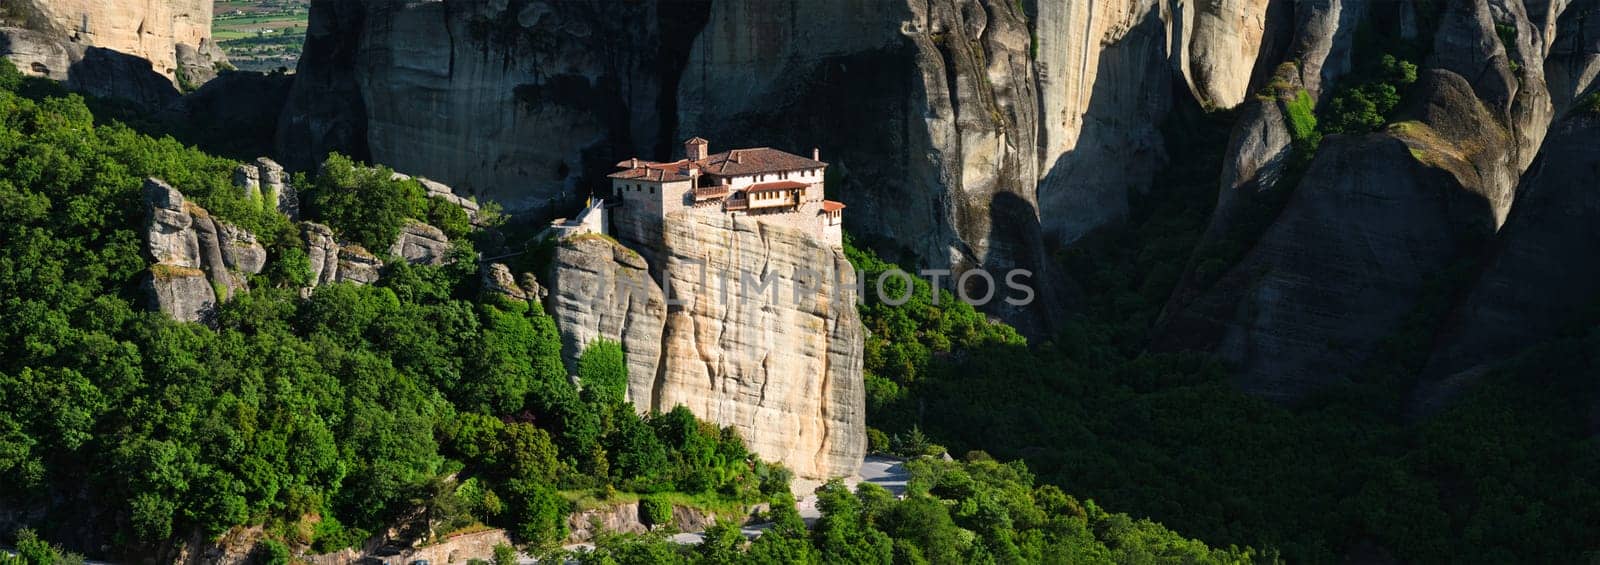 Panorama of Monastery of Rousanou in famous greek tourist destination Meteora in Greece on sunset with scenic landscape.